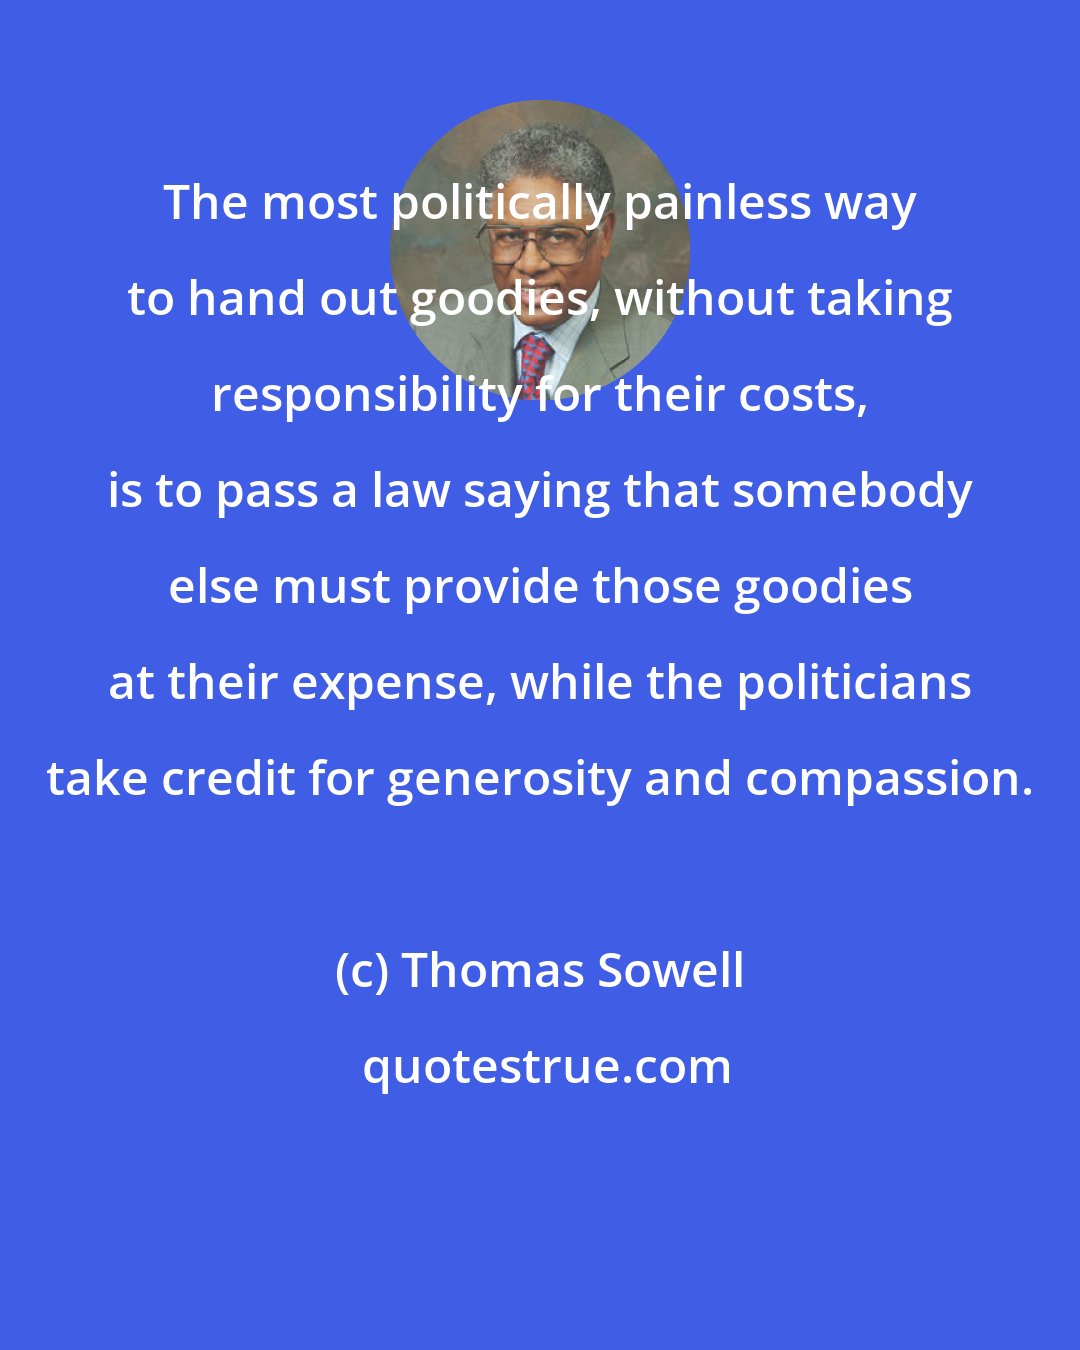 Thomas Sowell: The most politically painless way to hand out goodies, without taking responsibility for their costs, is to pass a law saying that somebody else must provide those goodies at their expense, while the politicians take credit for generosity and compassion.